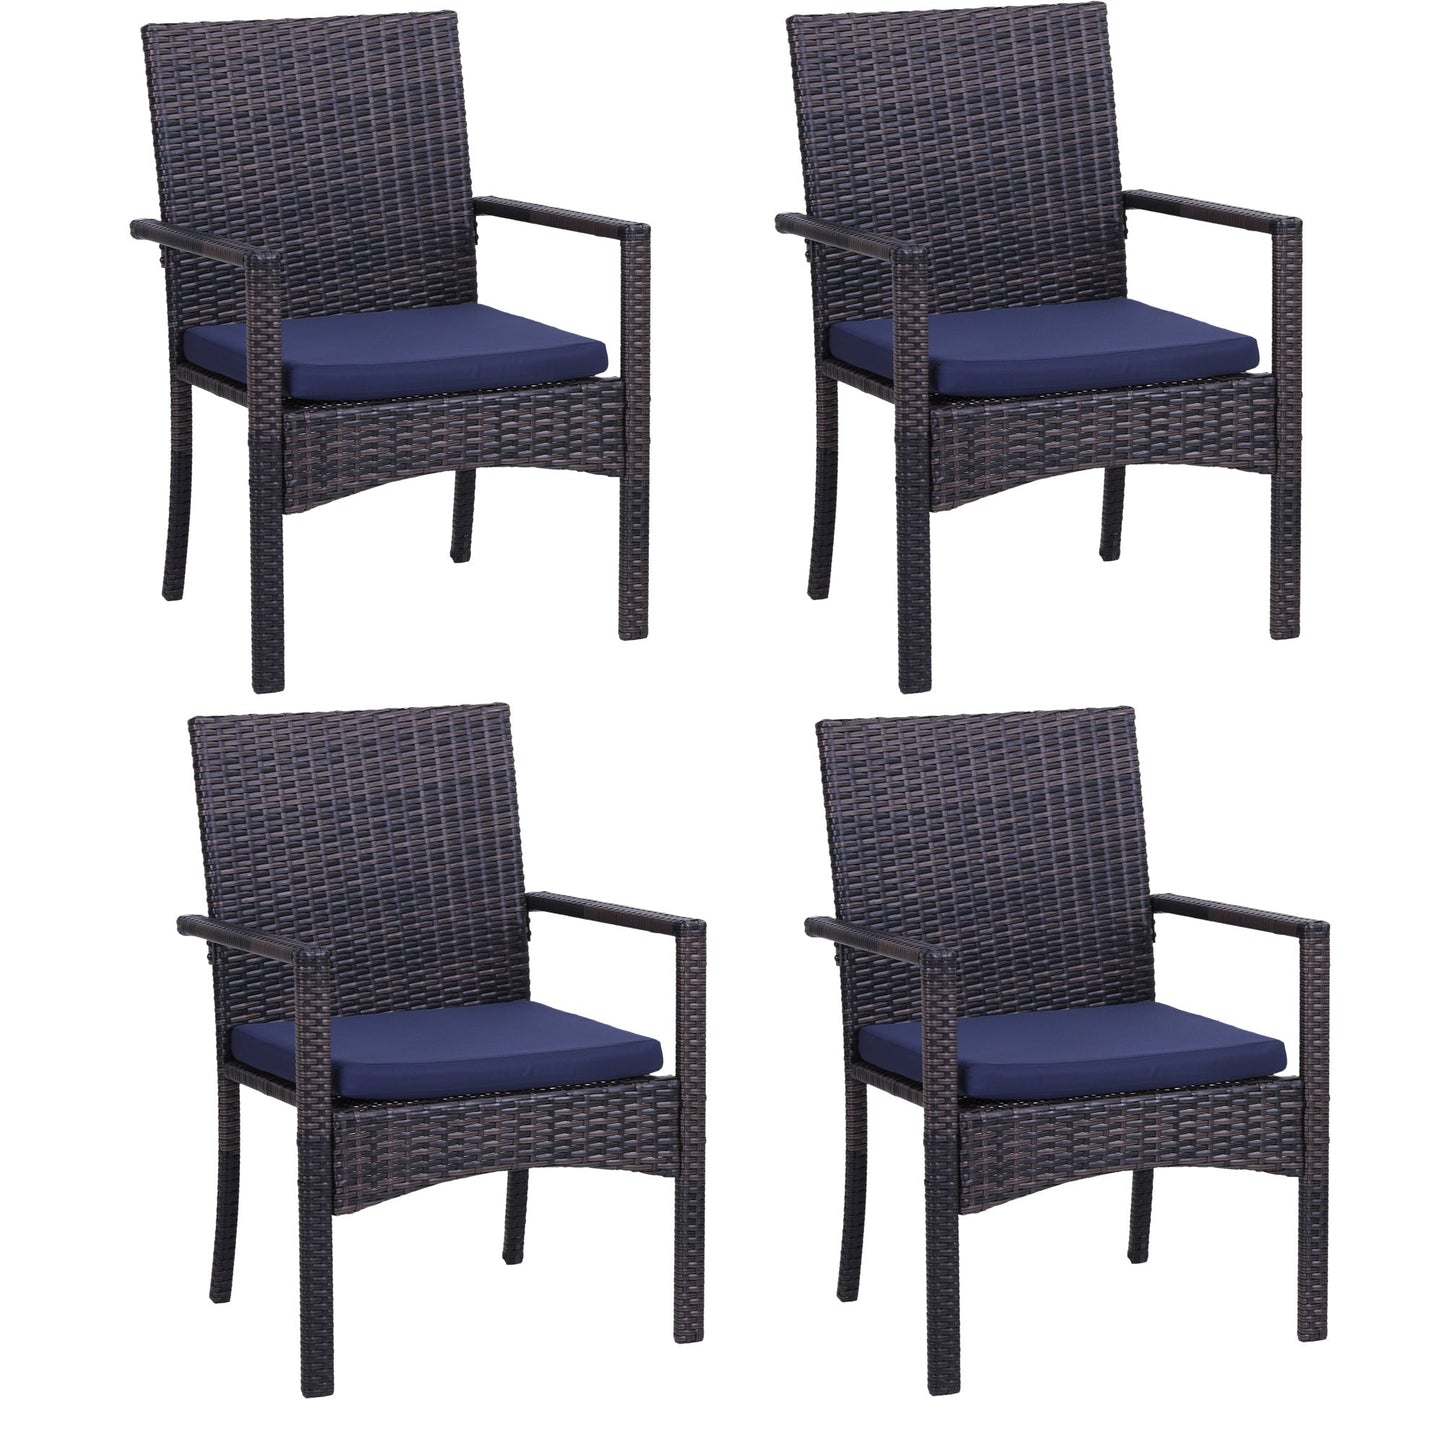 Sophia & William Patio Rattan Dining Chairs Set of 4 with Blue Cushions